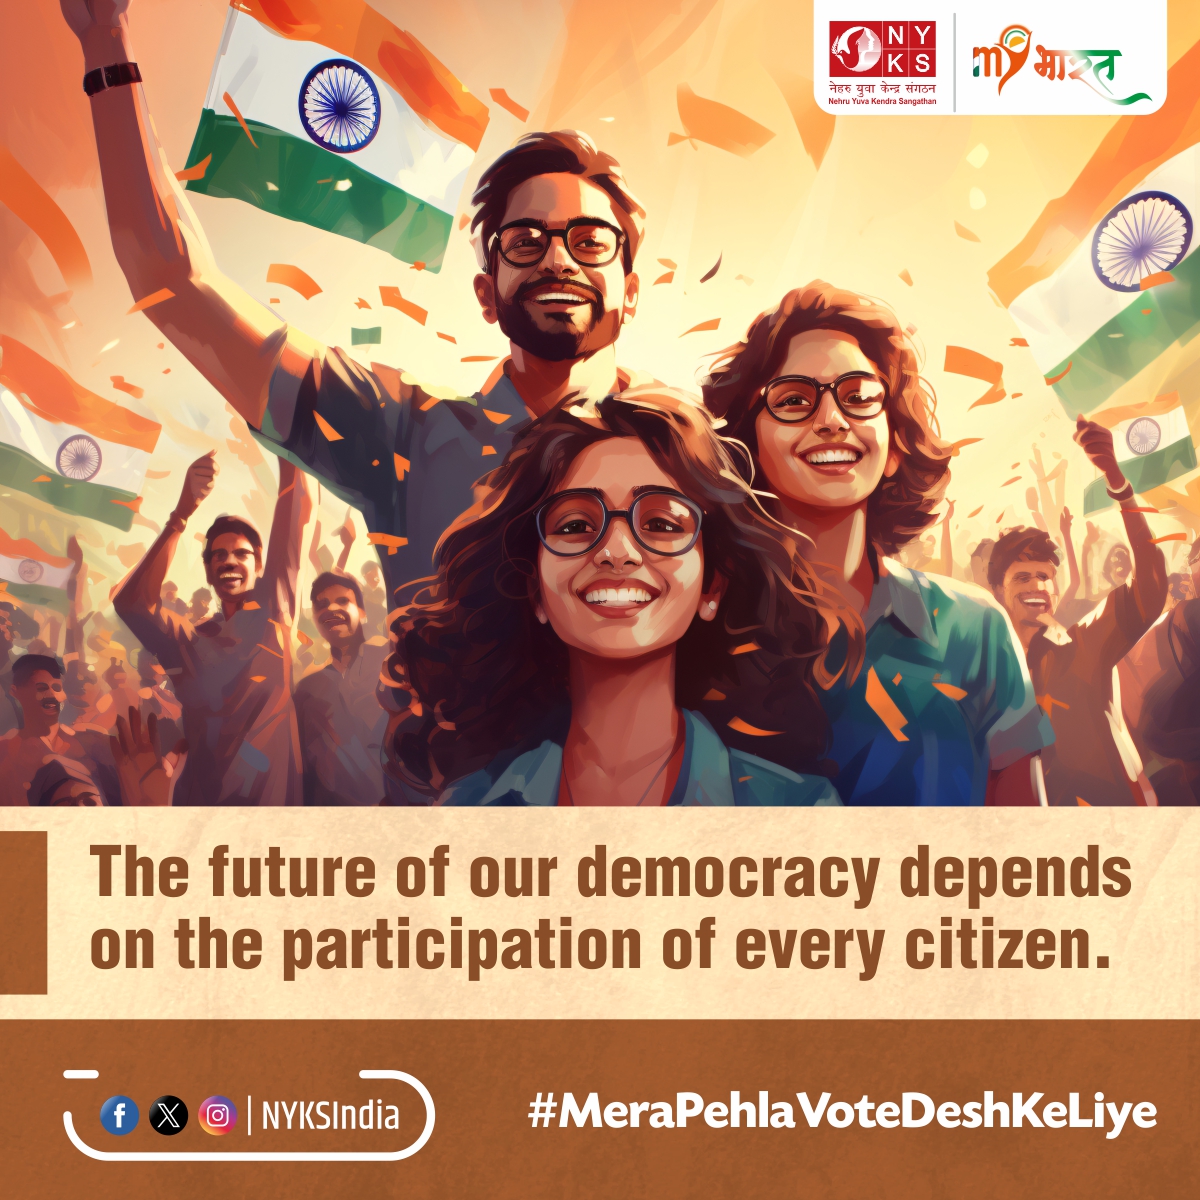 Your vote is your voice! 🗳️ Let's ensure the future of our democracy by actively participating in the electoral process. Every citizen's contribution counts. #MYBharatMYVote #Vote4Sure #MeraPehlaVoteDeshKeLiye #VoterAwareness #DemocracyMatters #NYKS